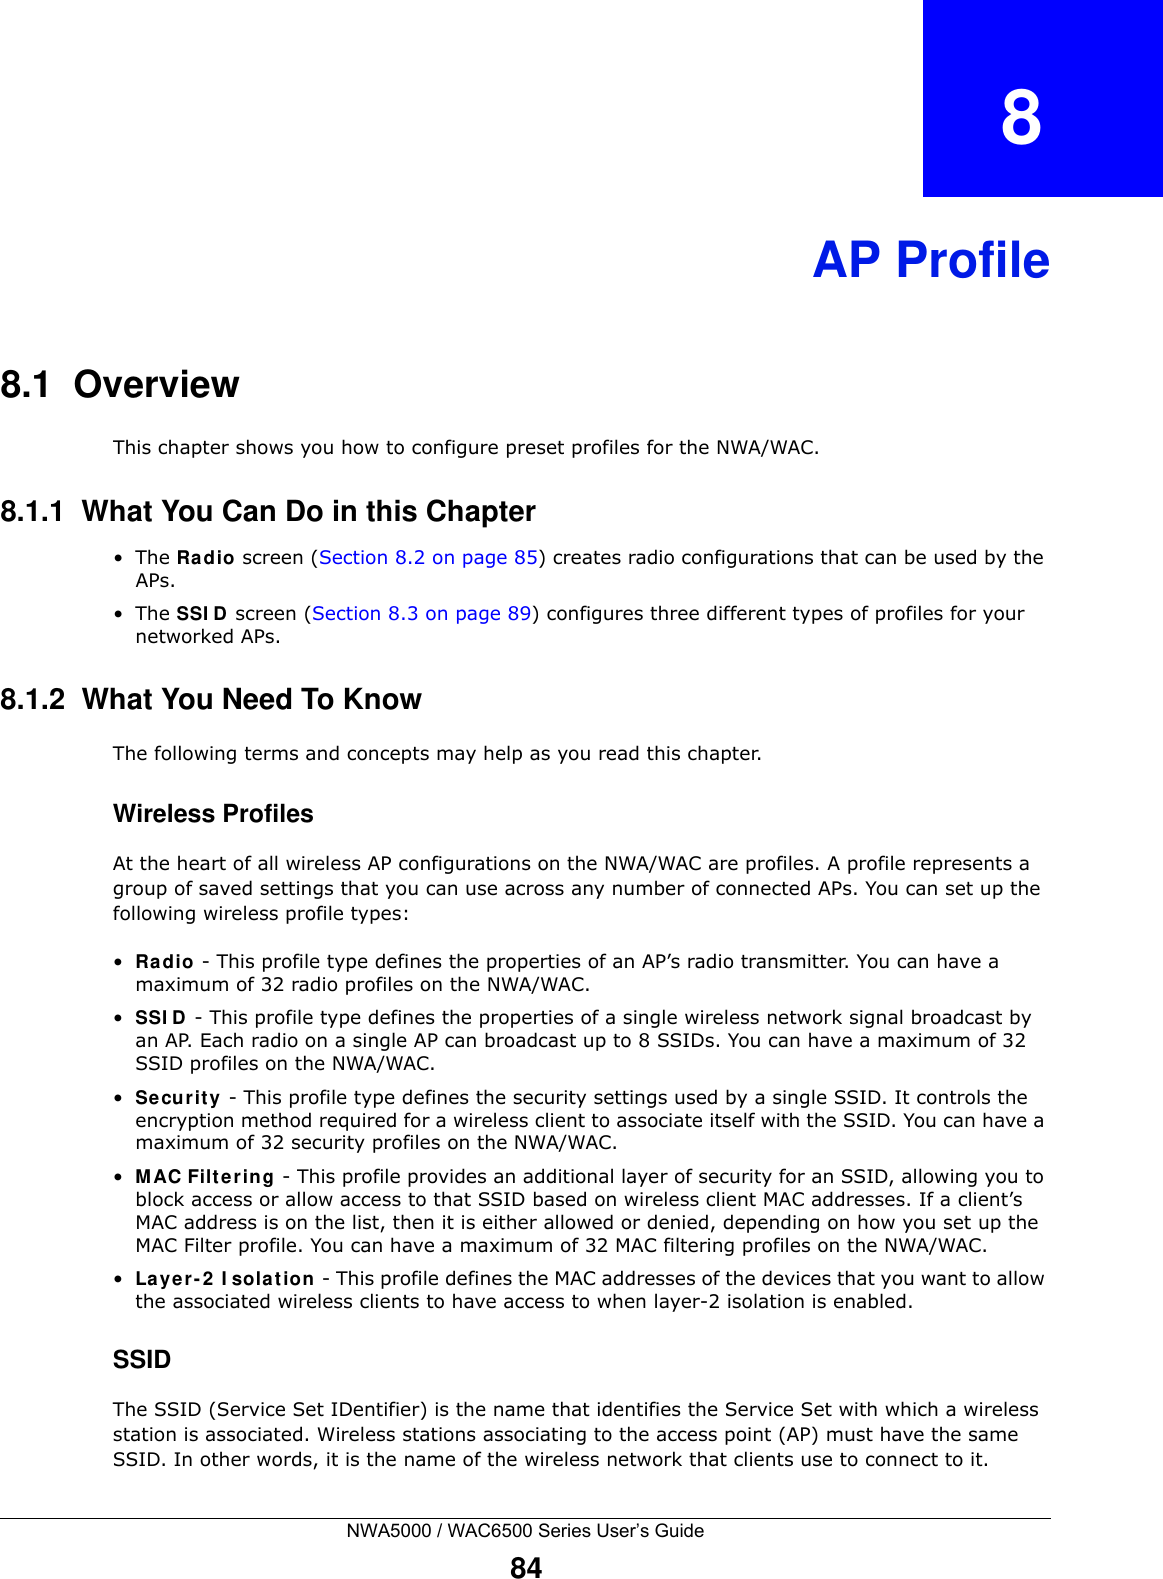 NWA5000 / WAC6500 Series User’s Guide84CHAPTER   8AP Profile8.1  OverviewThis chapter shows you how to configure preset profiles for the NWA/WAC. 8.1.1  What You Can Do in this Chapter•The Ra dio screen (Section 8.2 on page 85) creates radio configurations that can be used by the APs.•The SSI D  screen (Section 8.3 on page 89) configures three different types of profiles for your networked APs.8.1.2  What You Need To KnowThe following terms and concepts may help as you read this chapter.Wireless ProfilesAt the heart of all wireless AP configurations on the NWA/WAC are profiles. A profile represents a group of saved settings that you can use across any number of connected APs. You can set up the following wireless profile types:•Ra dio - This profile type defines the properties of an AP’s radio transmitter. You can have a maximum of 32 radio profiles on the NWA/WAC.•SSI D  - This profile type defines the properties of a single wireless network signal broadcast by an AP. Each radio on a single AP can broadcast up to 8 SSIDs. You can have a maximum of 32 SSID profiles on the NWA/WAC.•Se cu r it y  - This profile type defines the security settings used by a single SSID. It controls the encryption method required for a wireless client to associate itself with the SSID. You can have a maximum of 32 security profiles on the NWA/WAC.•MAC Filt er ing - This profile provides an additional layer of security for an SSID, allowing you to block access or allow access to that SSID based on wireless client MAC addresses. If a client’s MAC address is on the list, then it is either allowed or denied, depending on how you set up the MAC Filter profile. You can have a maximum of 32 MAC filtering profiles on the NWA/WAC.•La yer - 2  I sola tion - This profile defines the MAC addresses of the devices that you want to allow the associated wireless clients to have access to when layer-2 isolation is enabled. SSIDThe SSID (Service Set IDentifier) is the name that identifies the Service Set with which a wireless station is associated. Wireless stations associating to the access point (AP) must have the same SSID. In other words, it is the name of the wireless network that clients use to connect to it.